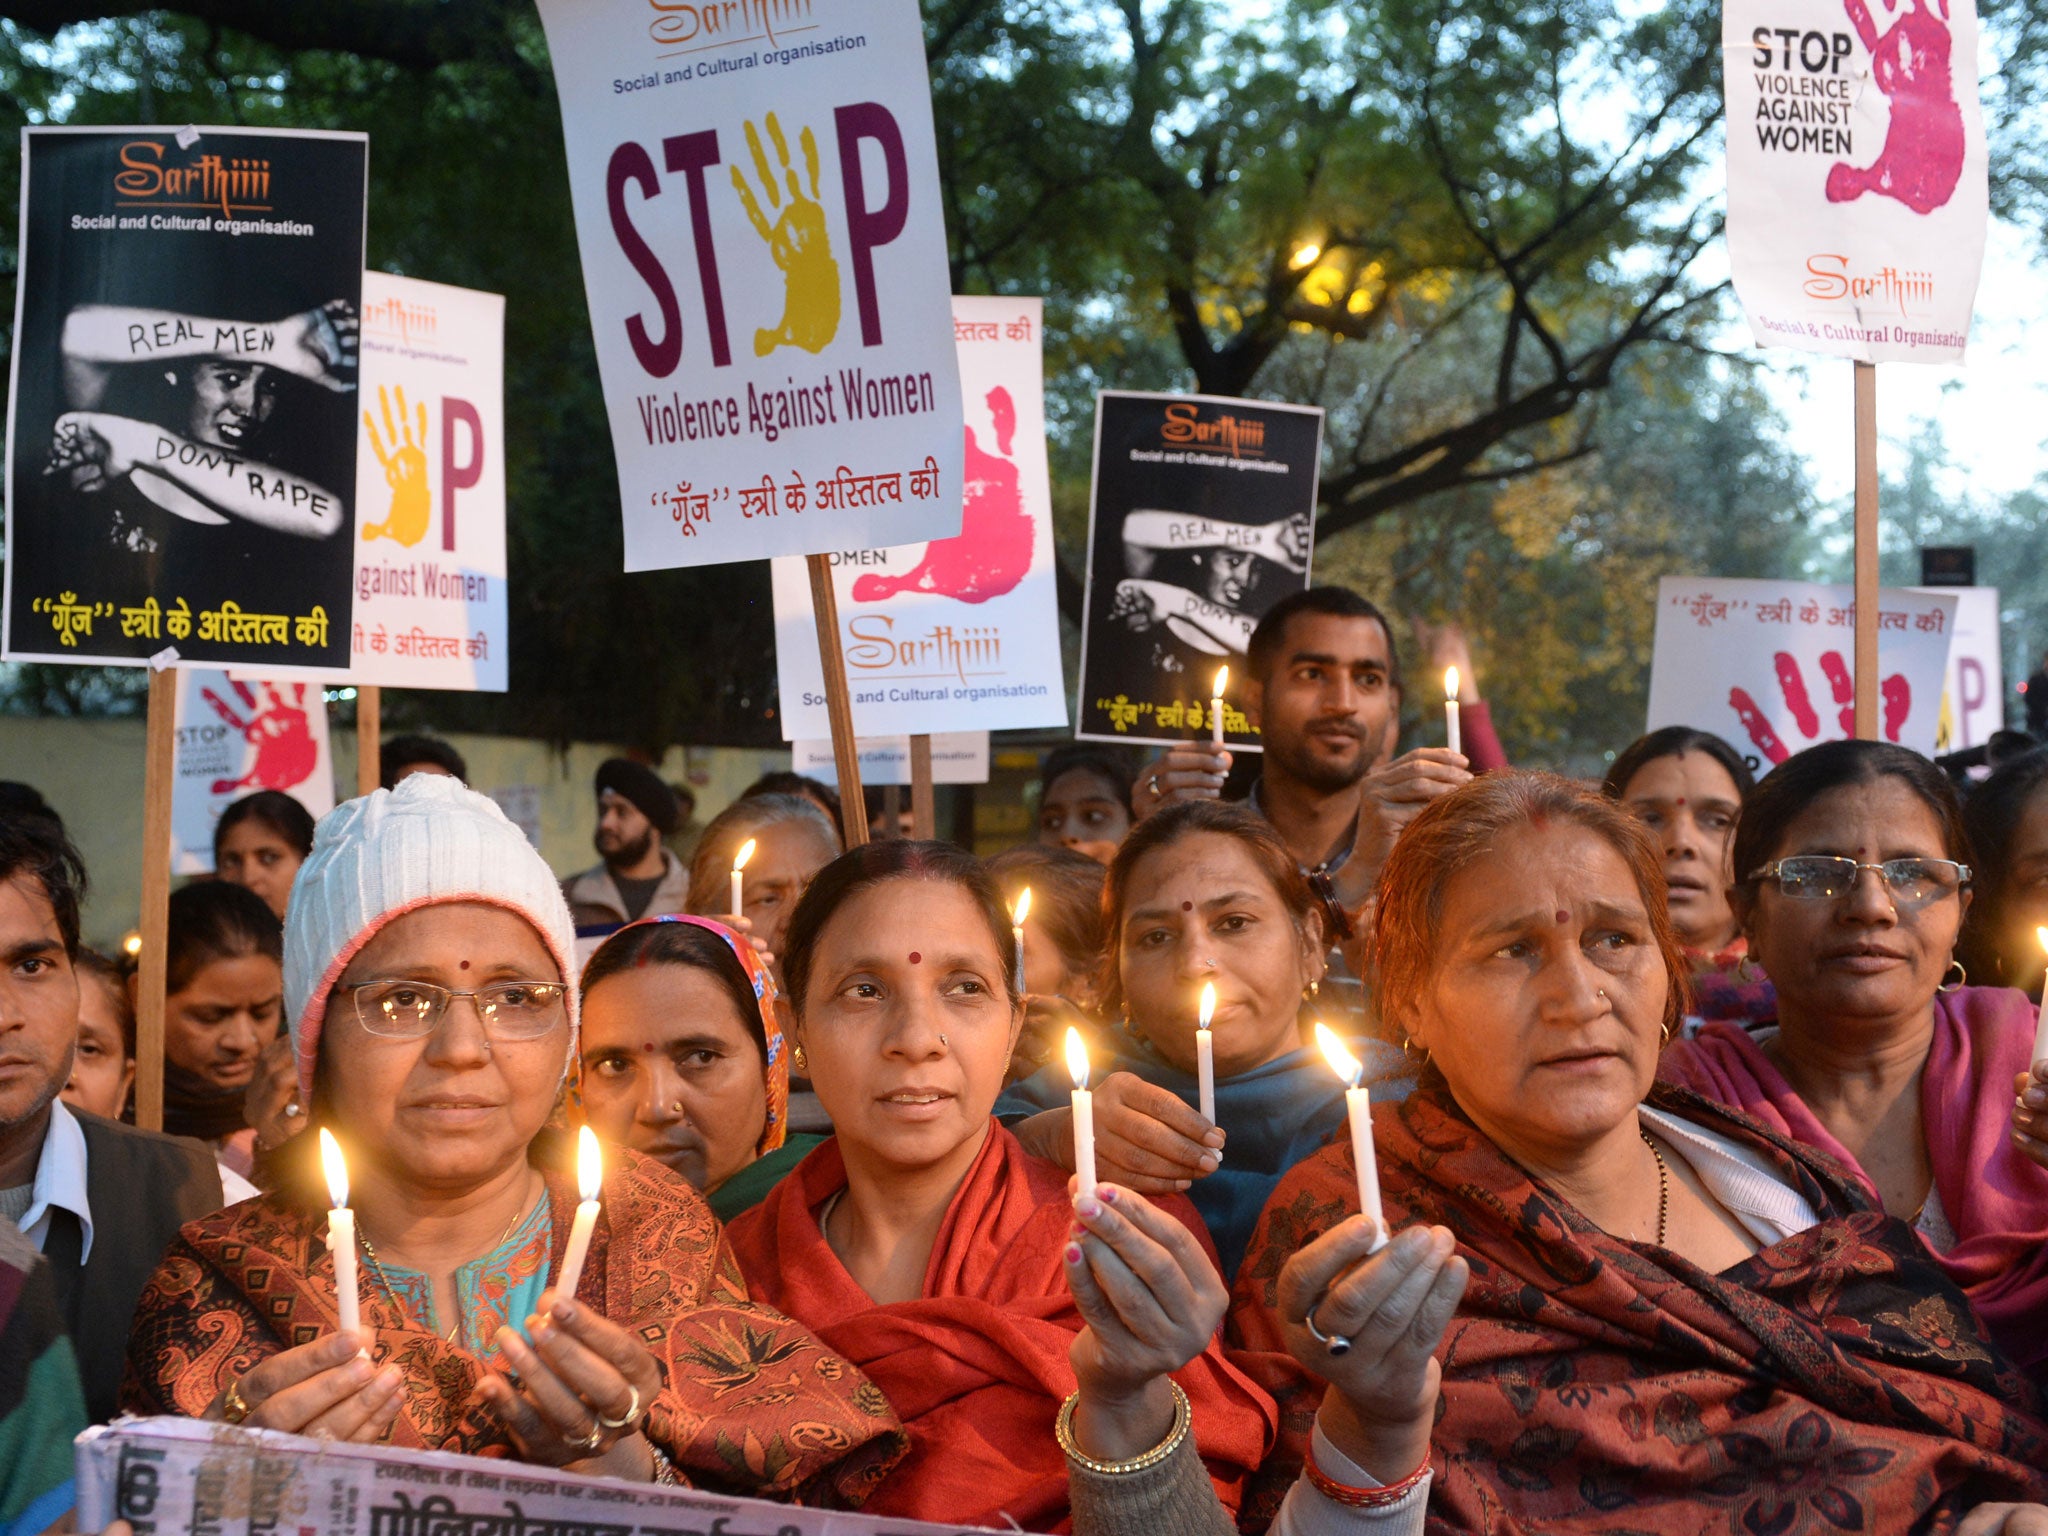 A series of recent attacks have sparked renewed outrage in India